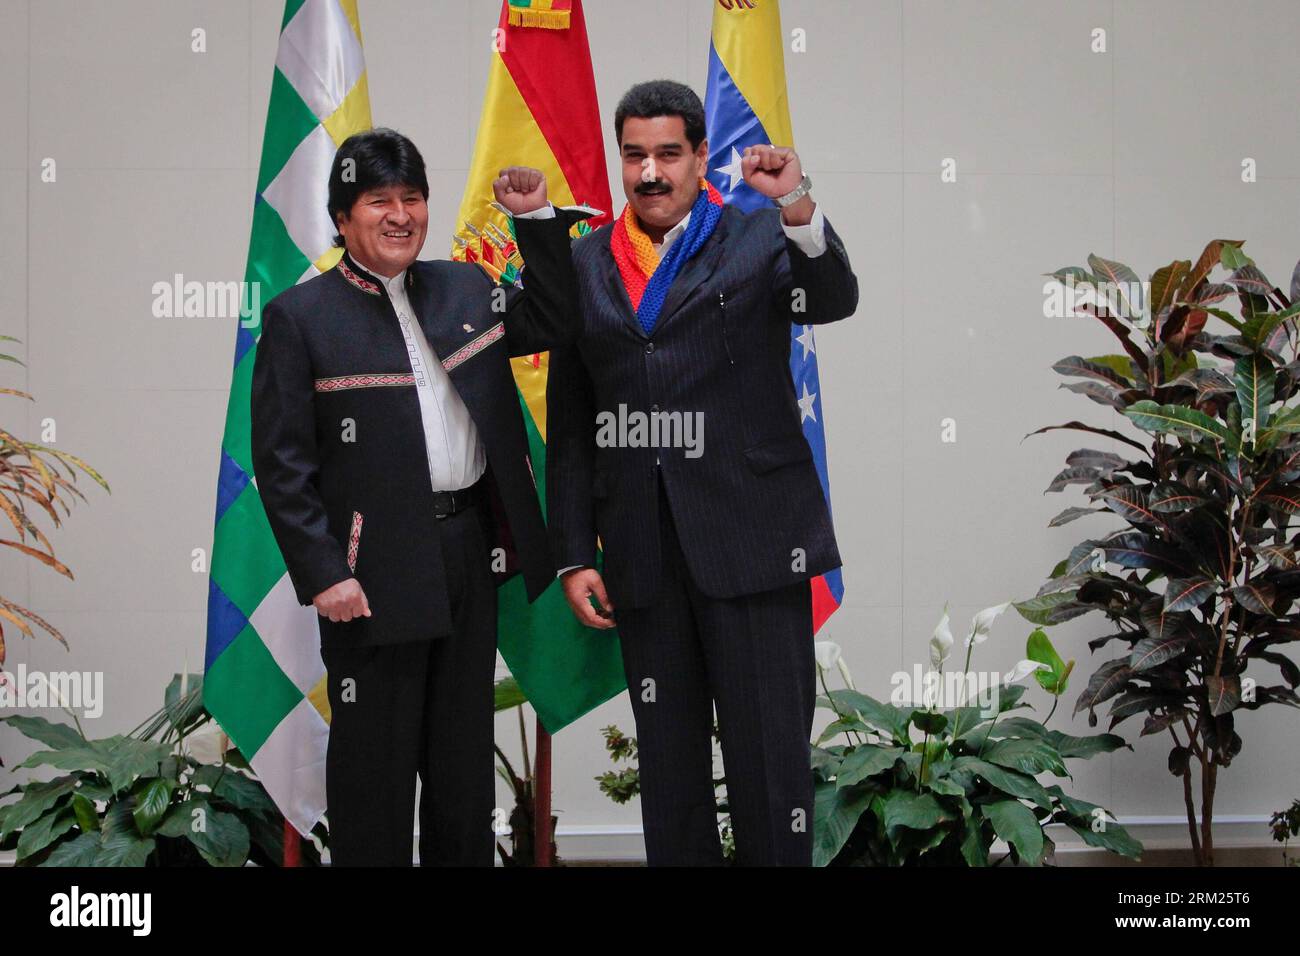 Bildnummer: 59701433  Datum: 25.05.2013  Copyright: imago/Xinhua Image provided by Venezuelan Presidency shows Venezuelan President Nicolas Maduro (R) and Bolivian President Evo Morales pose after their meeting in the city of Cochabamba, Bolivia, on May 25, 2013. (Xinhua/Presidency of Venezuela) (py) BOLIVIA-VENEZUELA-PRESIDENTS-MEETING PUBLICATIONxNOTxINxCHN Politik People xsp x1x 2013 quer Highlight premiumd     59701433 Date 25 05 2013 Copyright Imago XINHUA Image provided by Venezuelan Presidency Shows Venezuelan President Nicolas Maduro r and Bolivian President Evo Morales Pose After thei Stock Photo